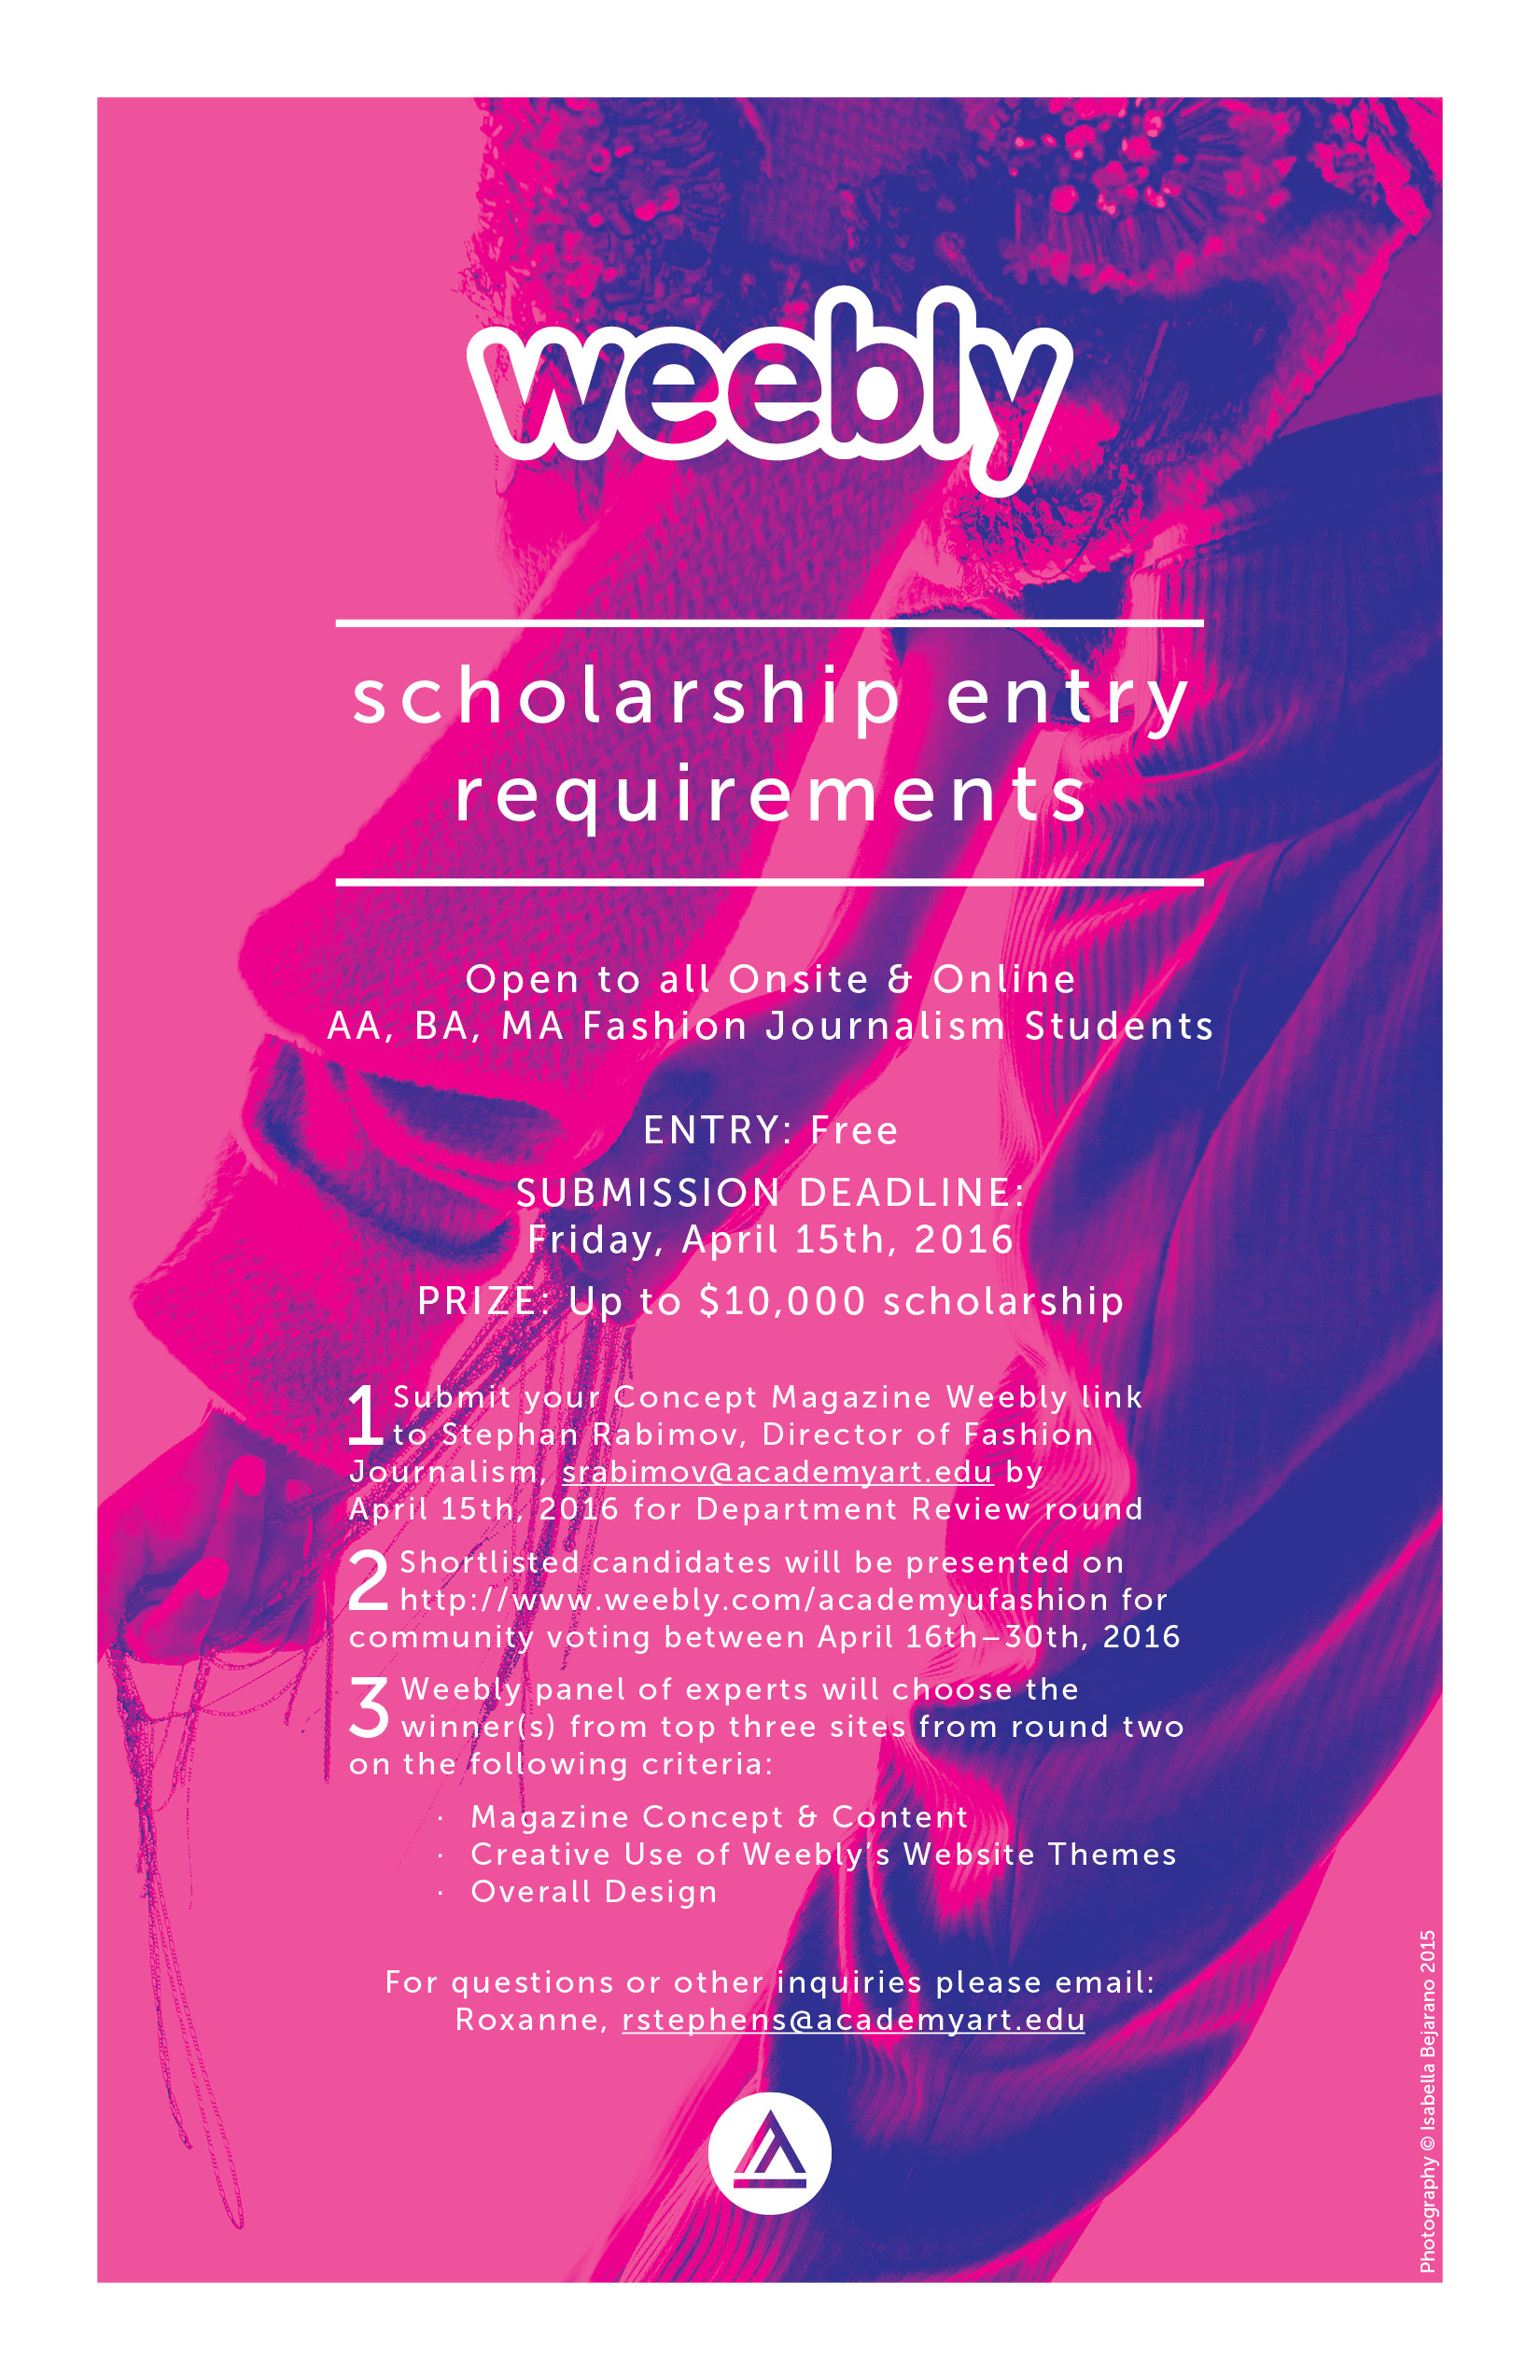 weebly_scholarship